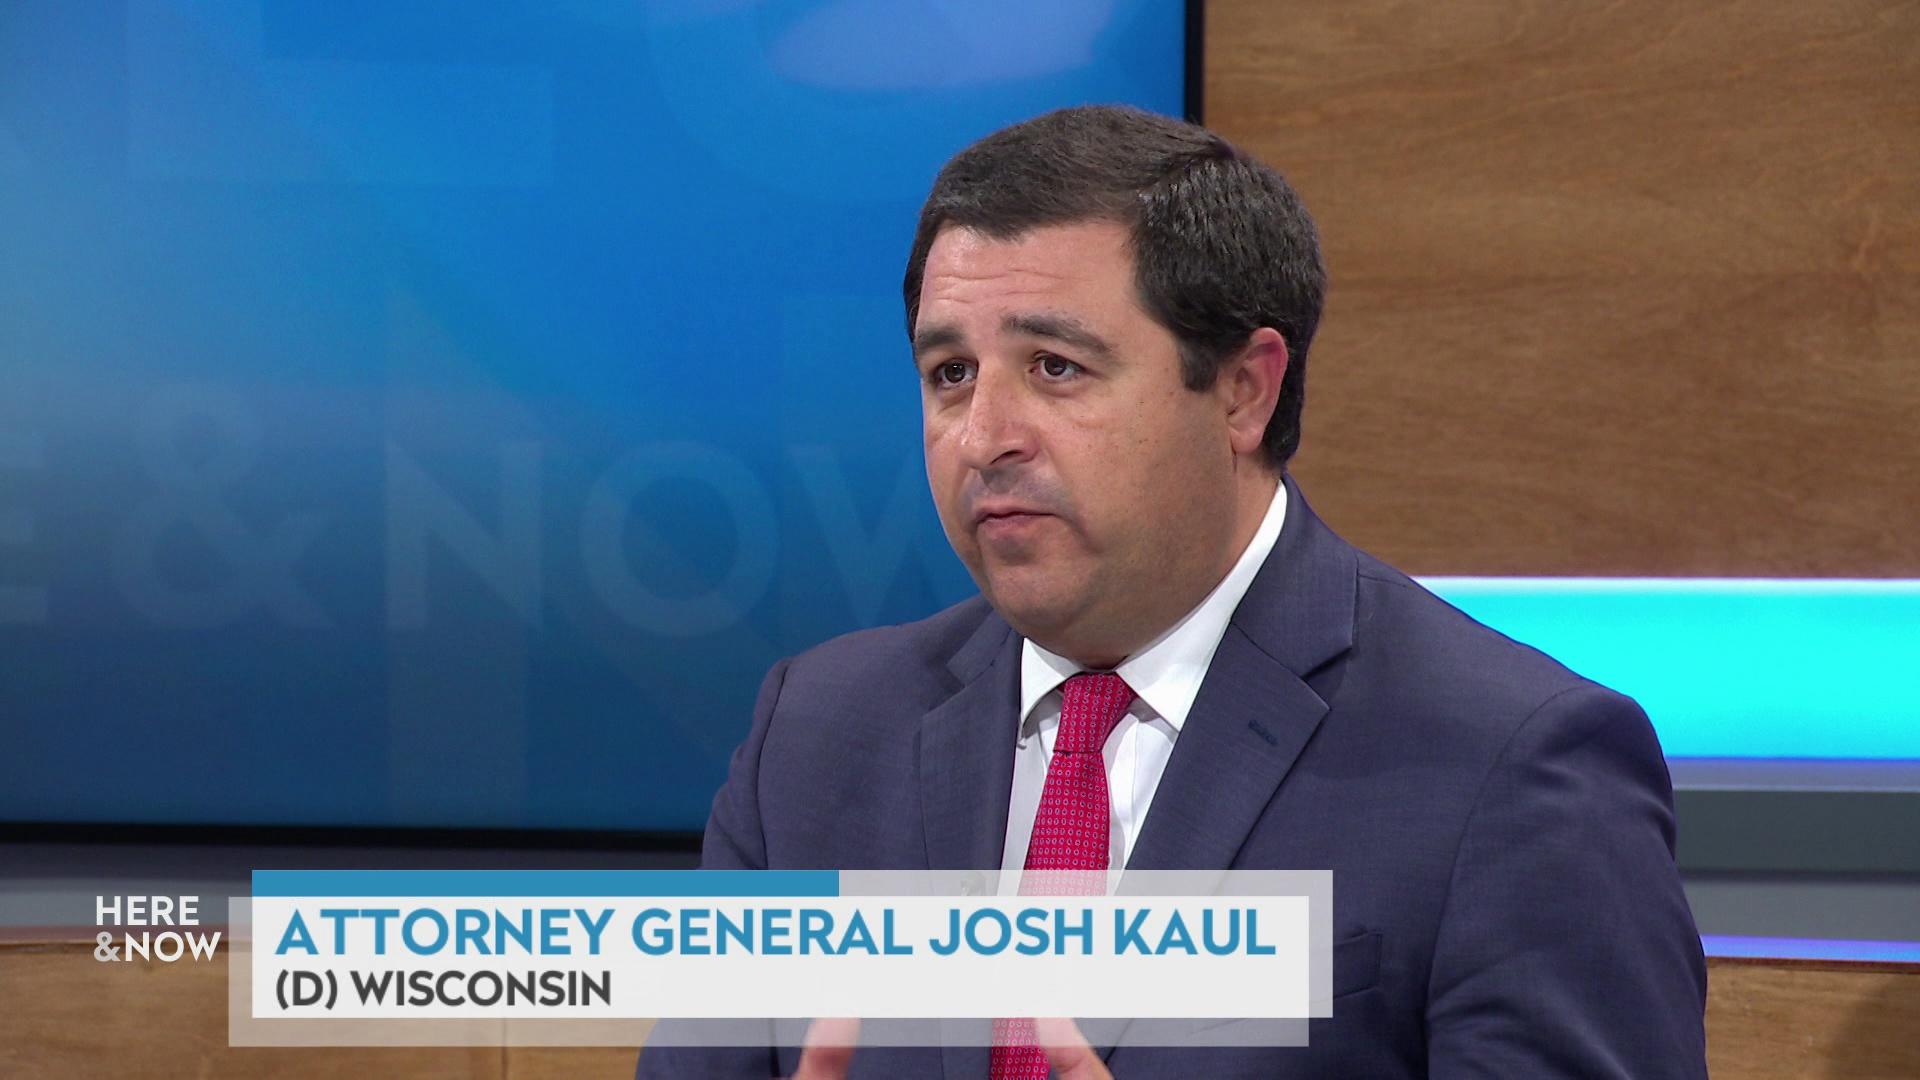 A still image shows Josh Kaul seated at the 'Here & Now' set featuring wood paneling, with a graphic at bottom reading 'Attorney General Josh Kaul' and '(D) Wisconsin.'